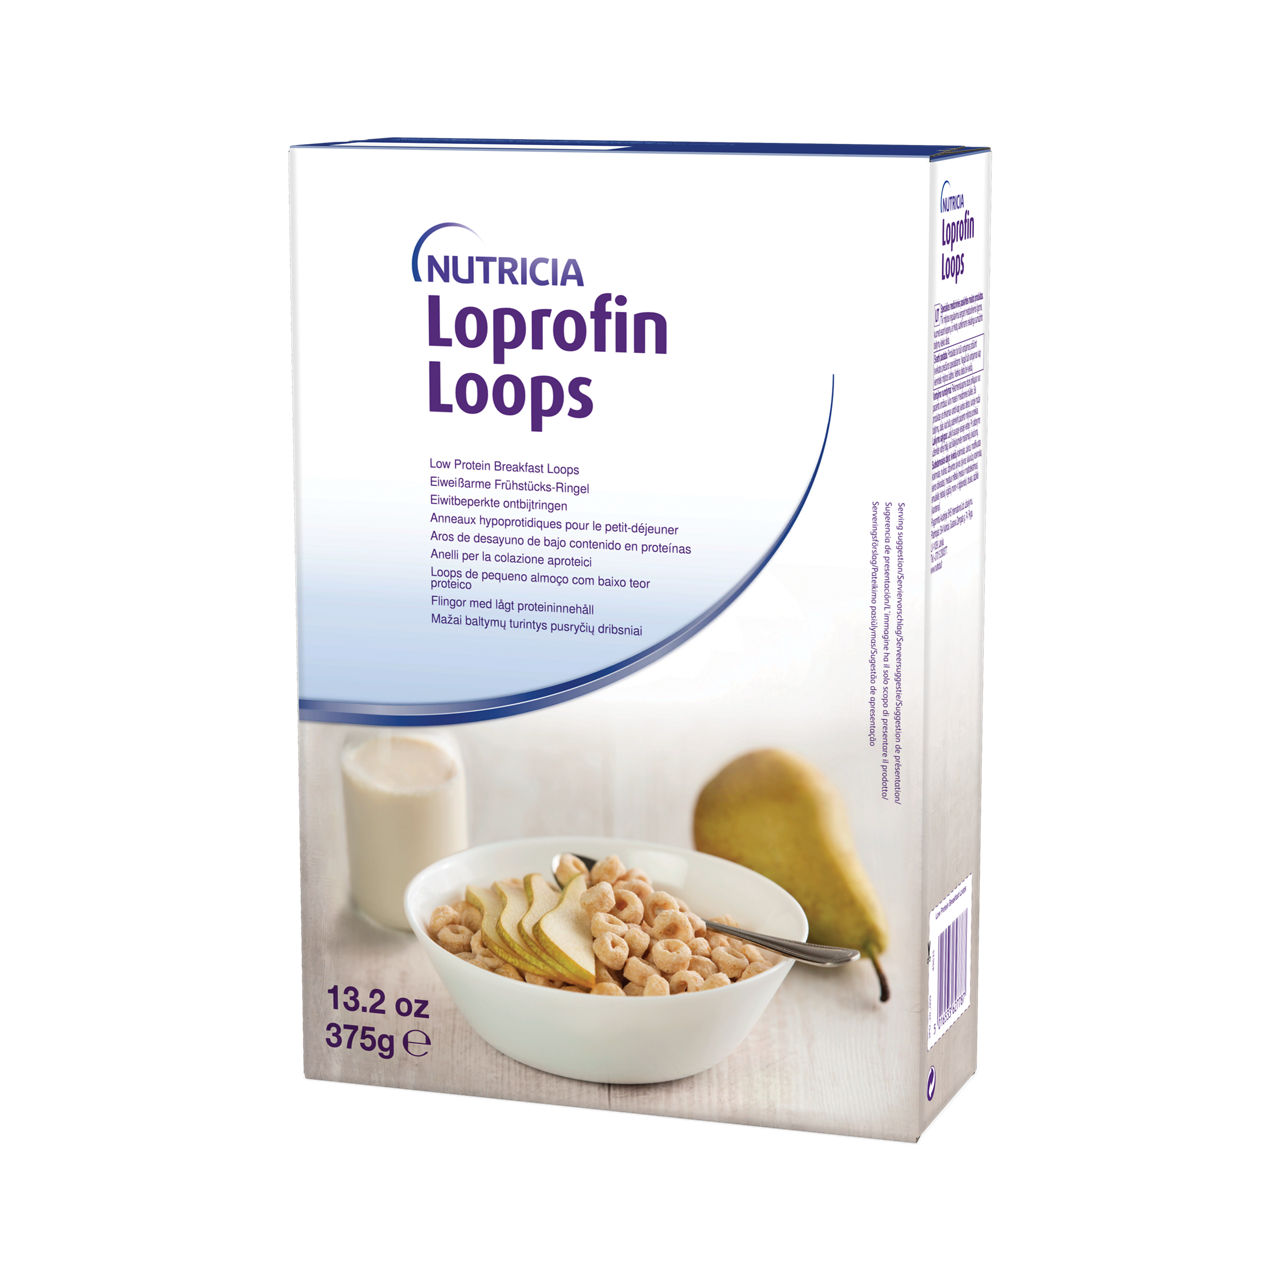 Loprofin Low Protein Cereal Loops 375g Box